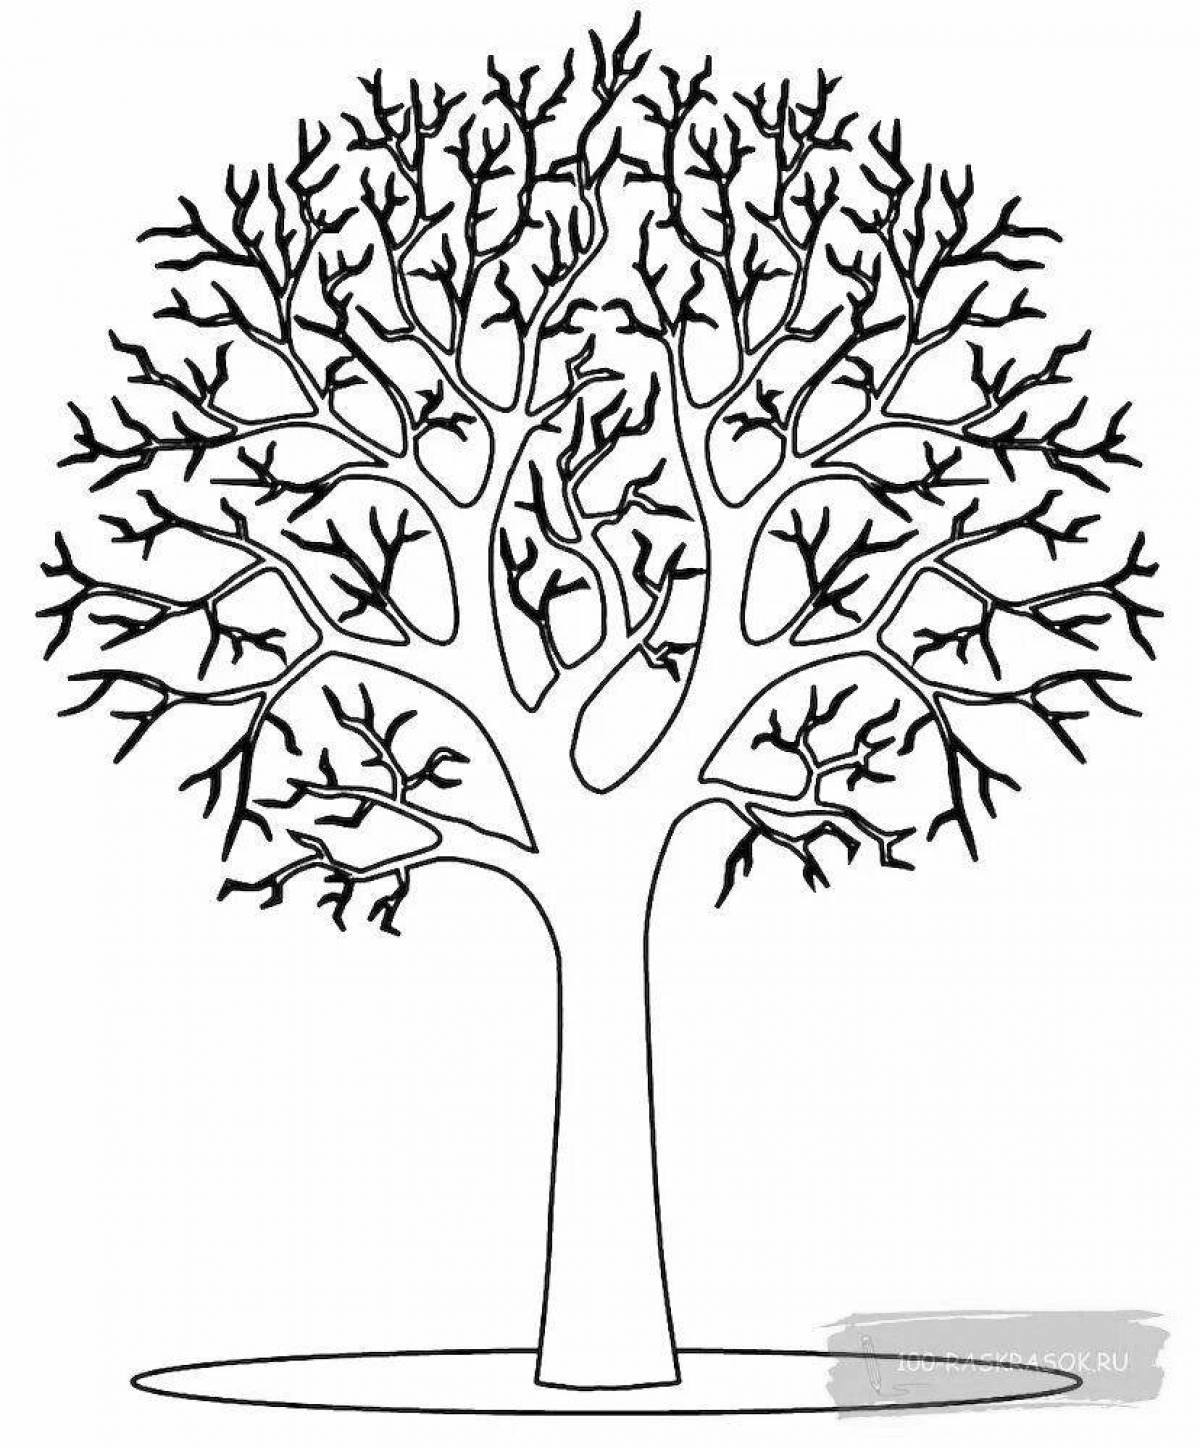 Colorful playful tree trunk coloring page for kids